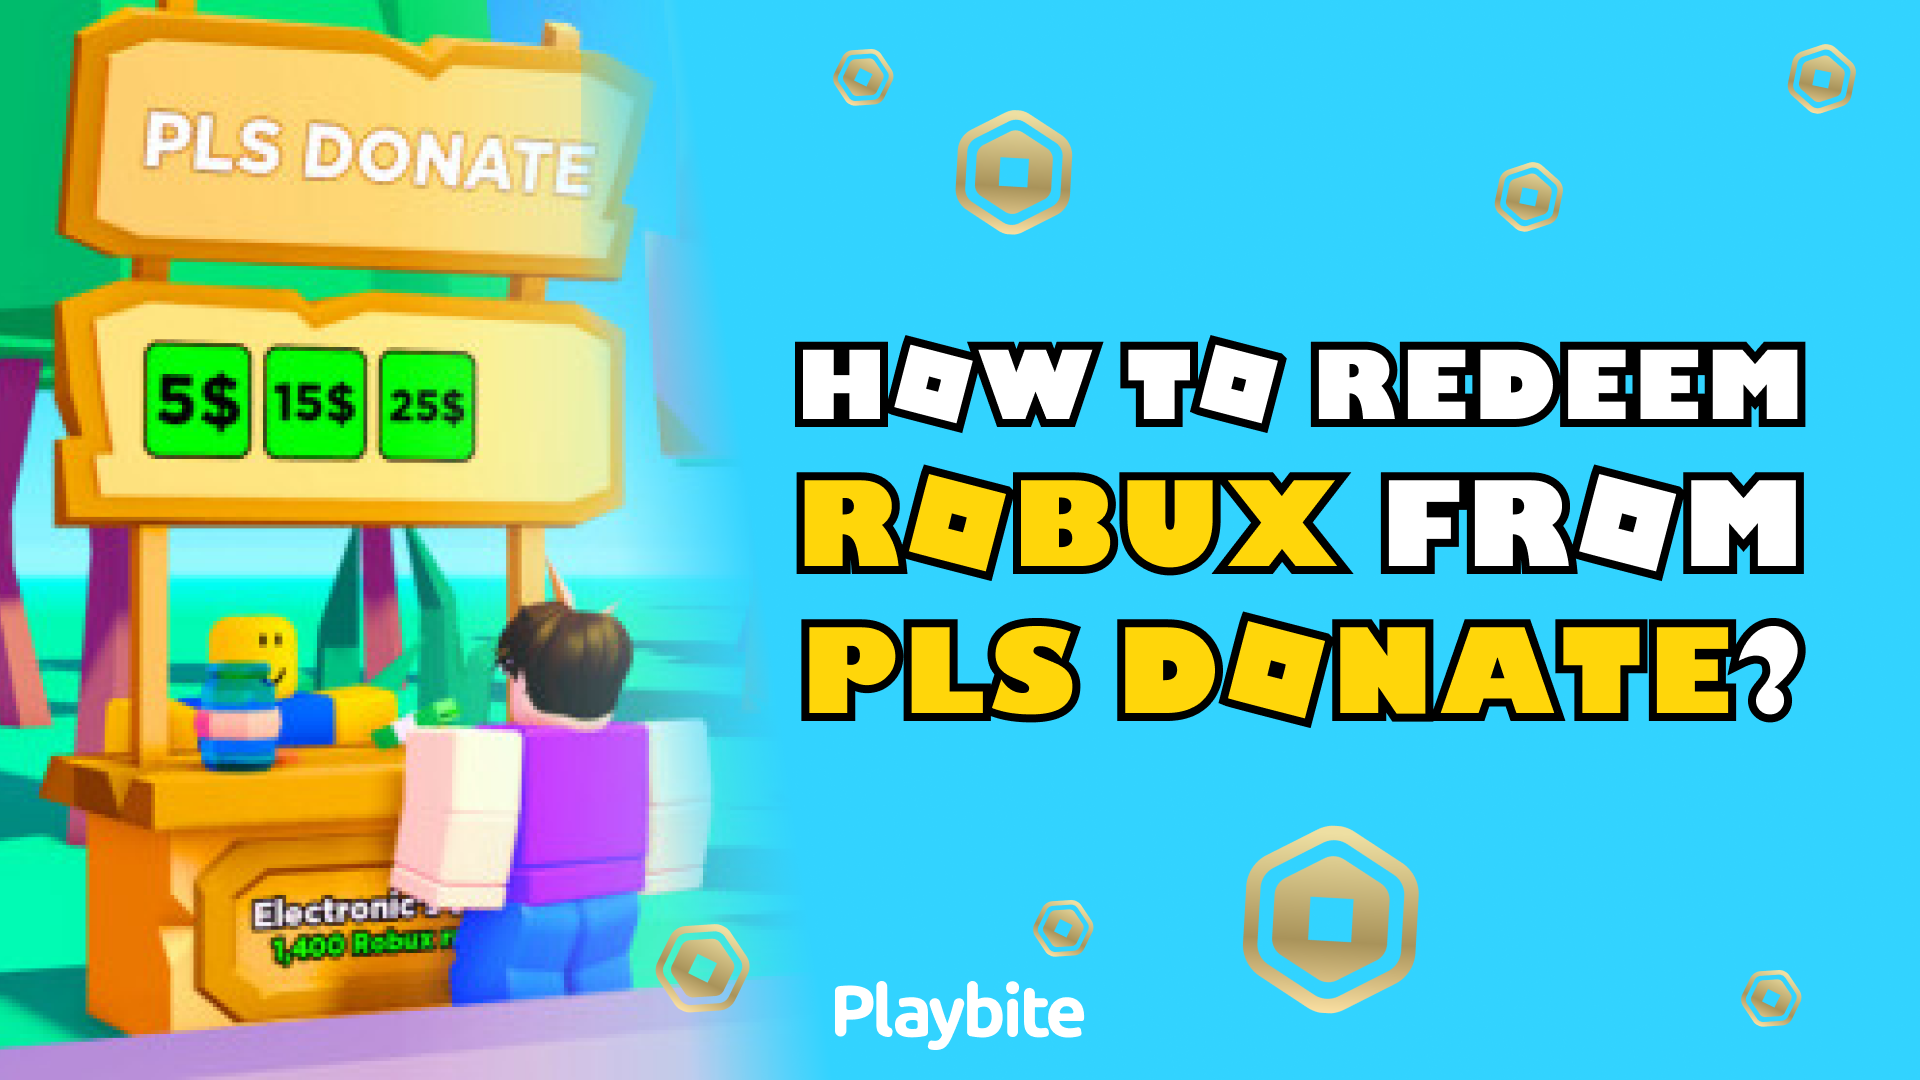 How to Send ROBUX to Friends on Roblox